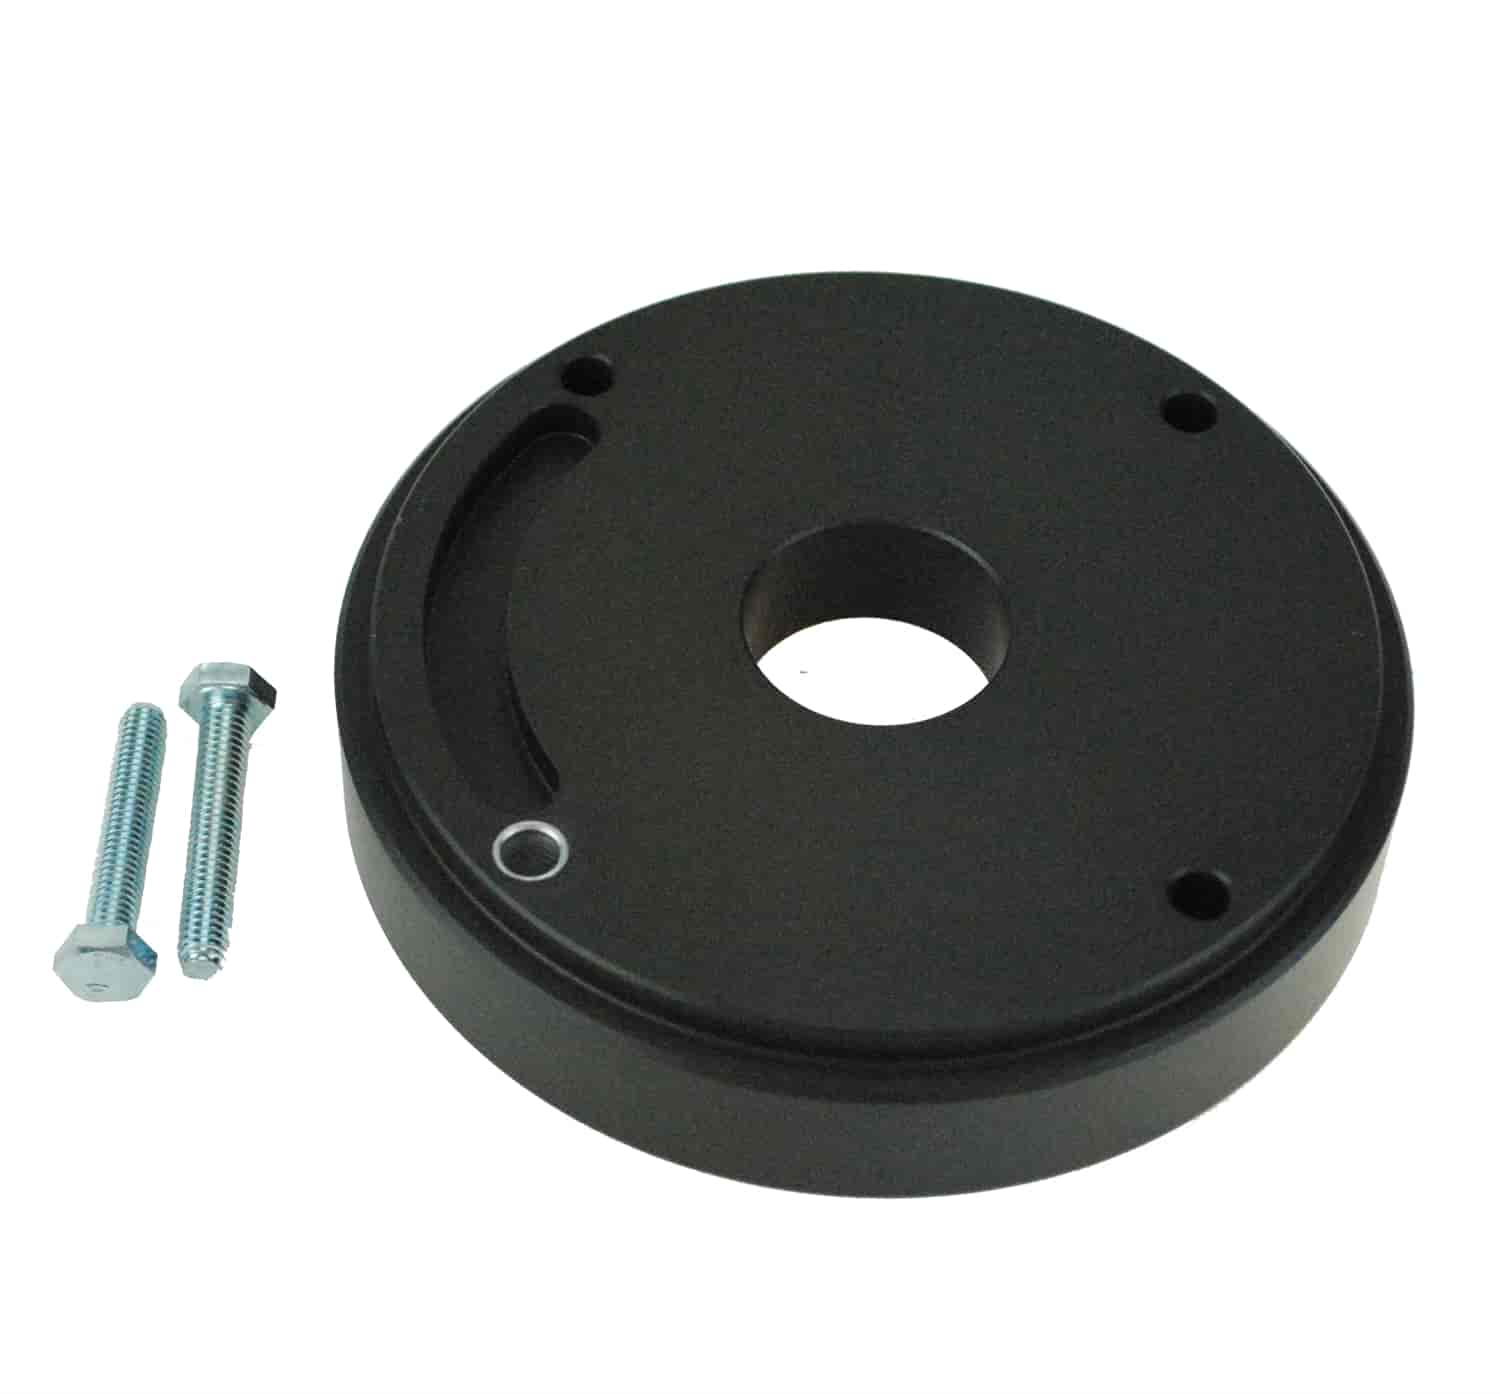 Hydraulic Bearing Aluminum Spacer .750" Thick for T56/6060 Collar-Off Transmissions